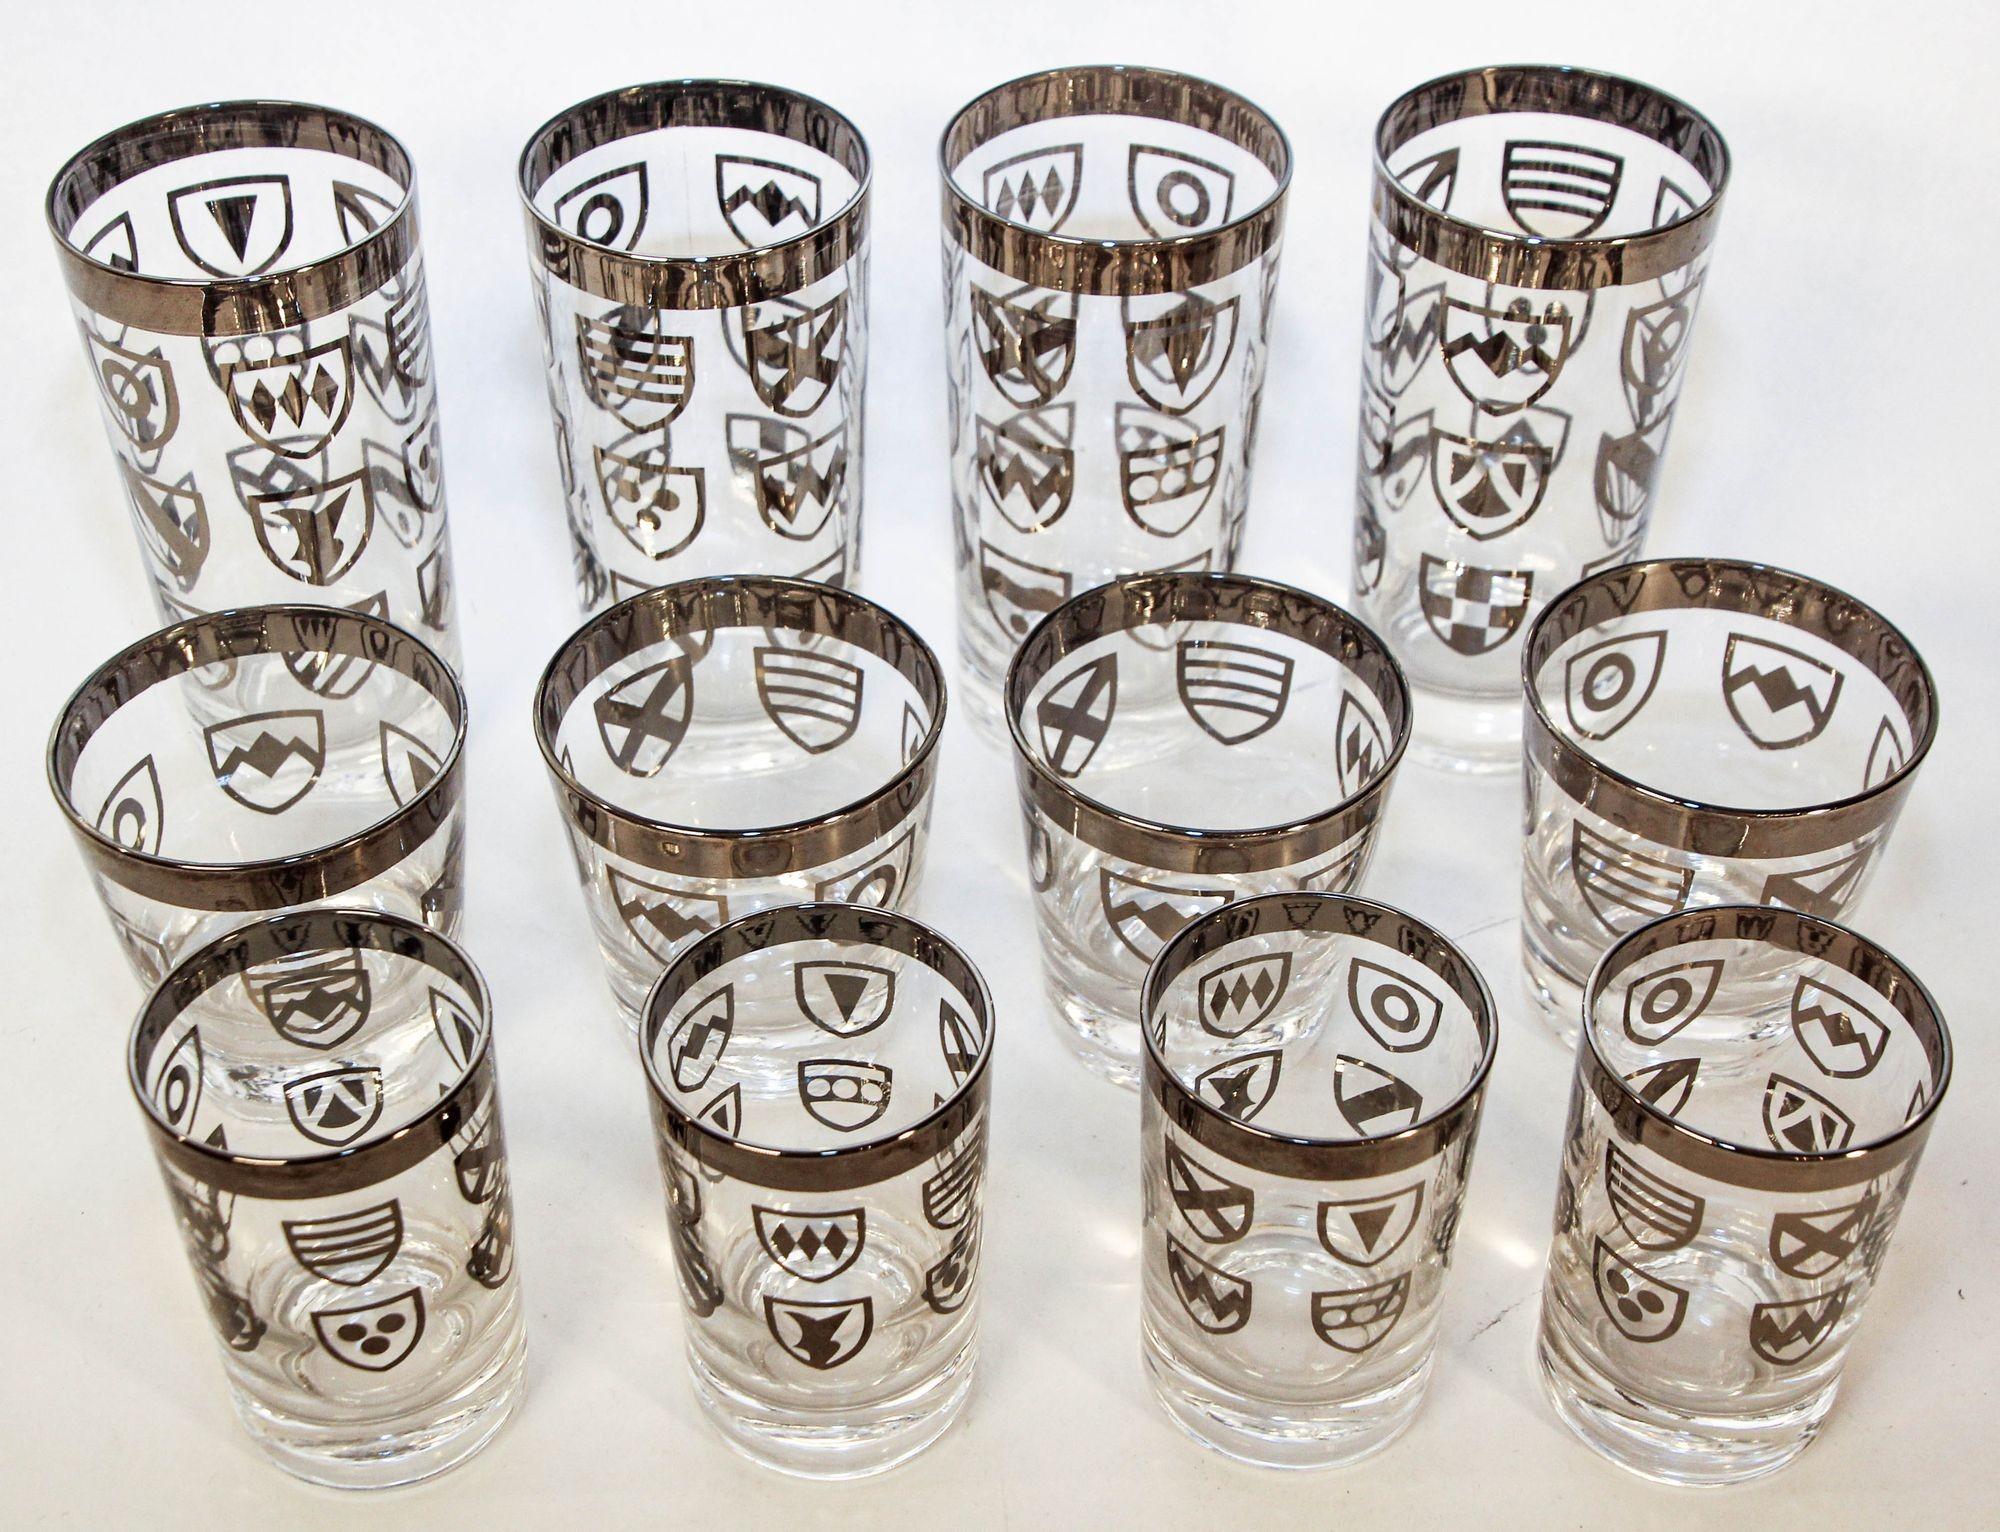 Vintage Japnese Kimiko Style Silver Cocktail Glasses Set of 12.
Vintage Set of 12 Kimiko style glasses from the 1960s, featuring a silver band and a shield crest accent.
Set of 12 Vintage Mid-Century Kimiko highball glasses and shot glasses.
This